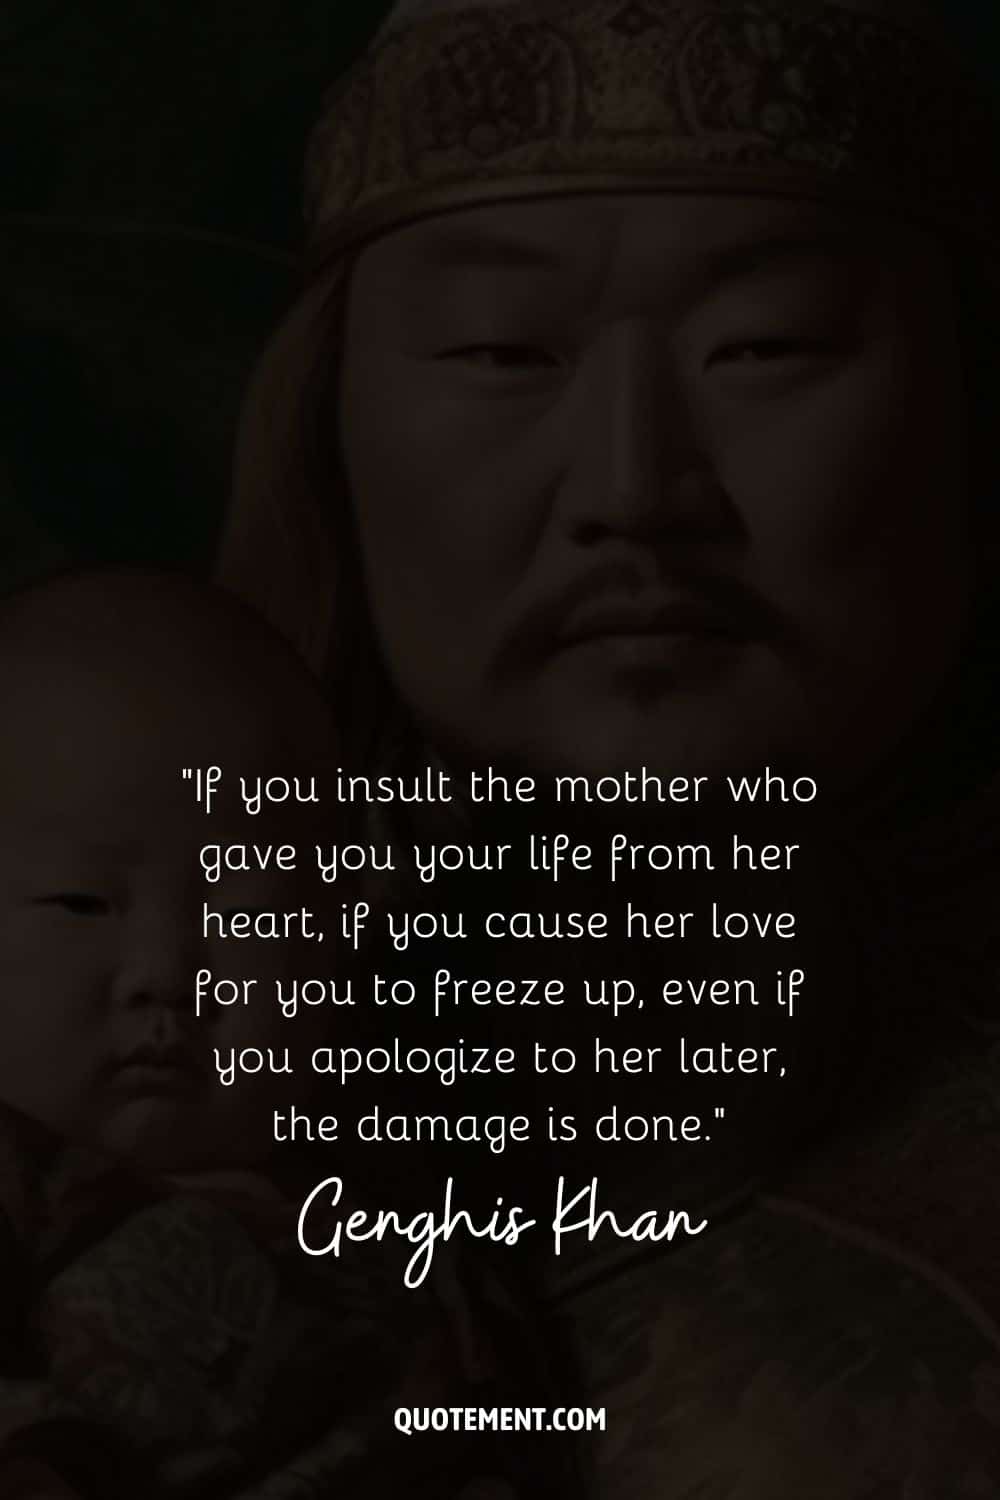 If you insult the mother who gave you your life from her heart, if you cause her love for you to freeze up, even if you apologize to her later, the damage is done